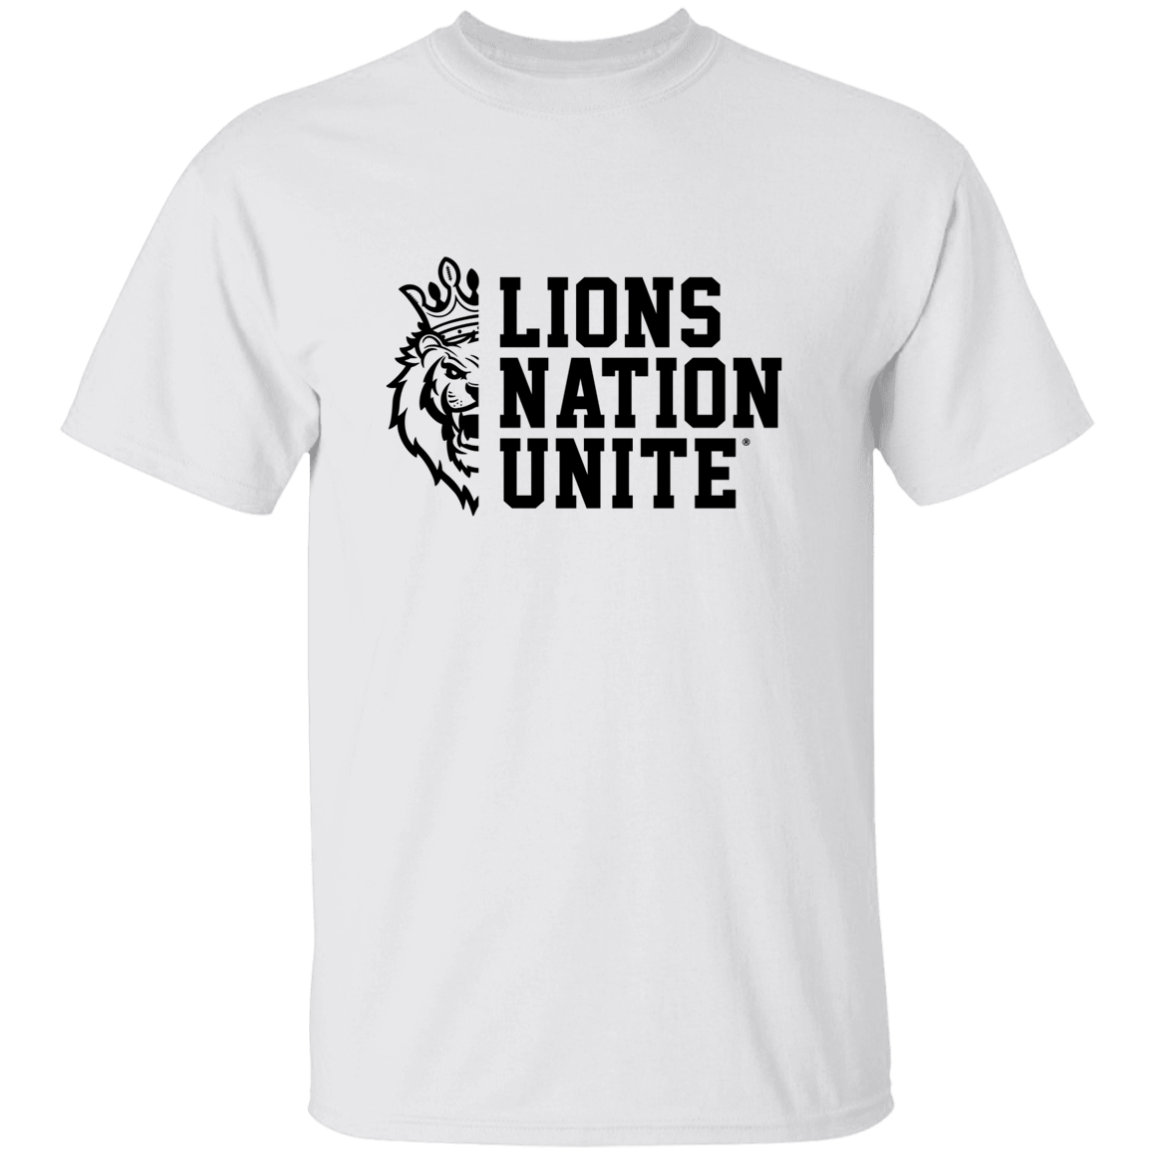 Lions Nation Unite® Youth T-Shirt